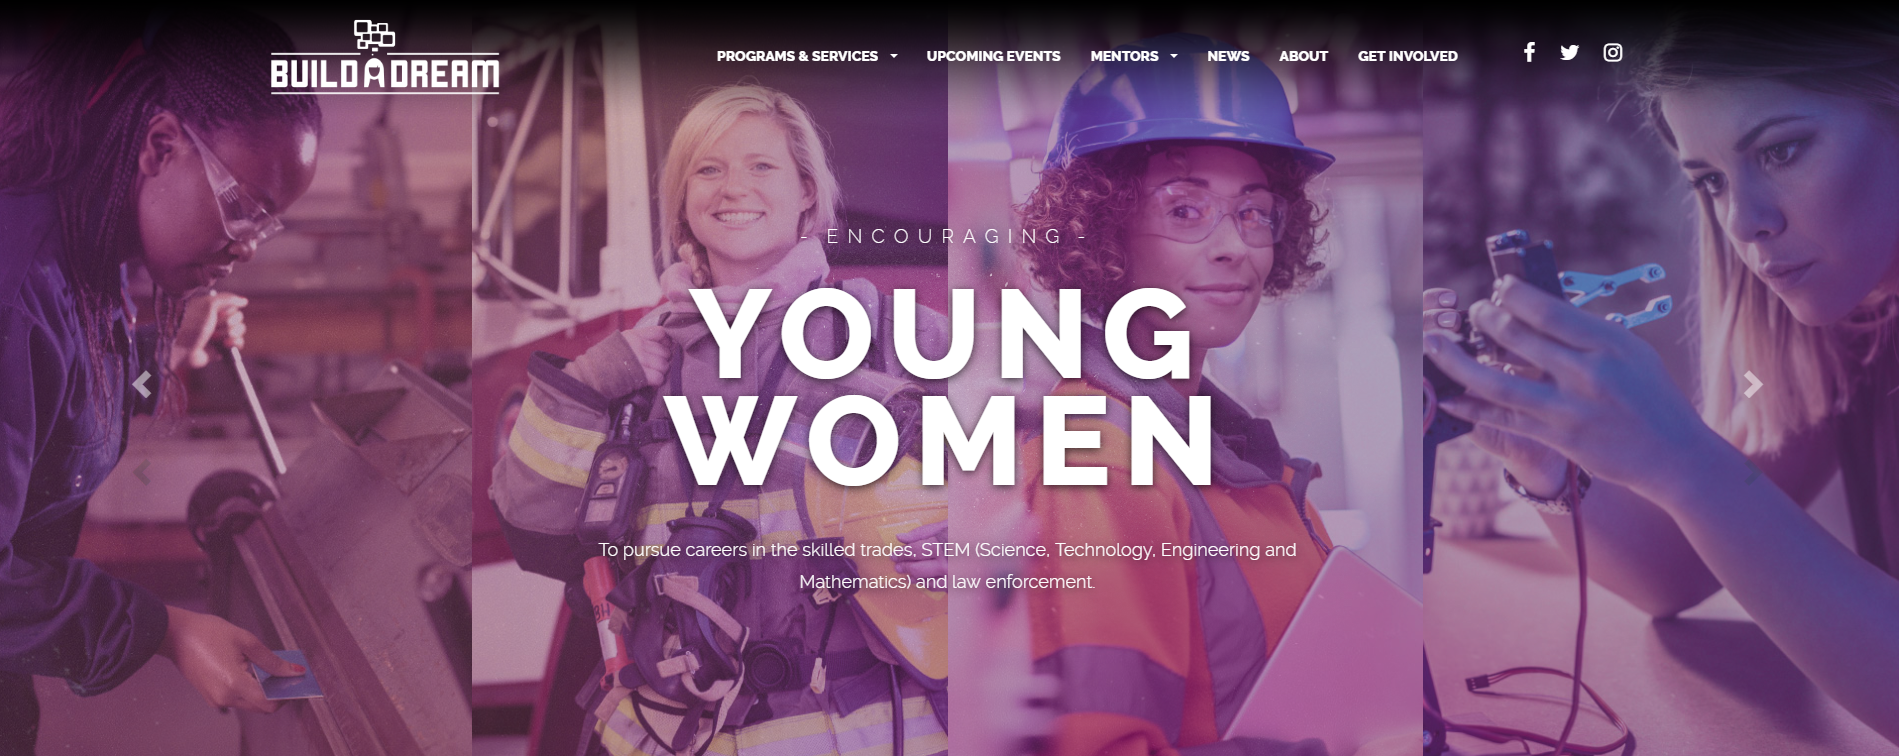 Build a Dream encouraging young women website image